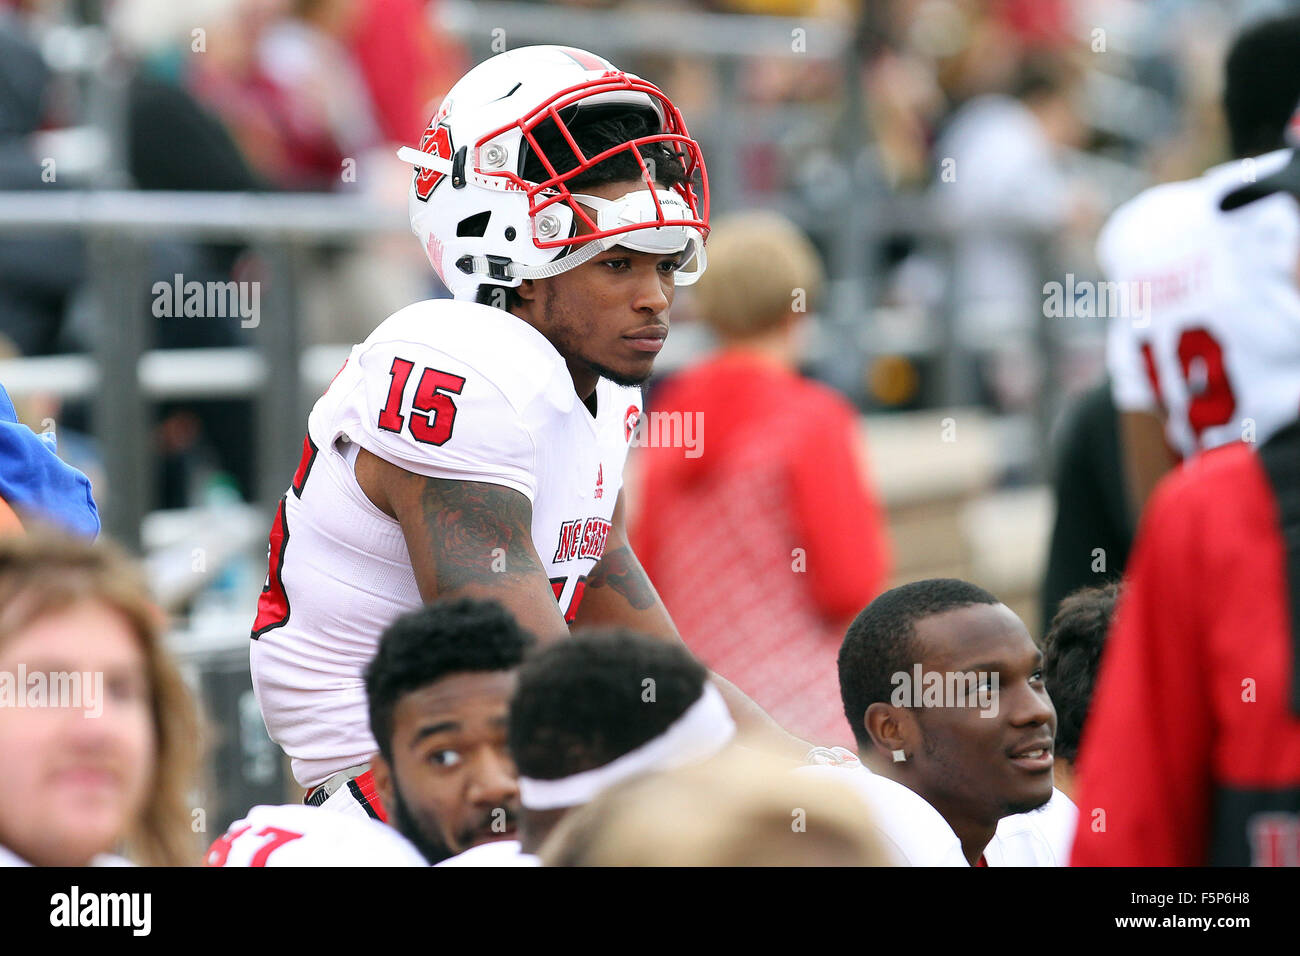 Chestnut Hill, USA. 7th Nov, 2015. MA, USA; North Carolina State Wolfpack wide receiver Johnathan Alston (15) on the sideline during the first half of the NCAA football game between the Boston College Eagles and North Carolina State Wolfpack at Alumni Stadium. North Carolina State defeated Boston College 24-8. Anthony Nesmith/Cal Sport Media/Alamy Live News Stock Photo